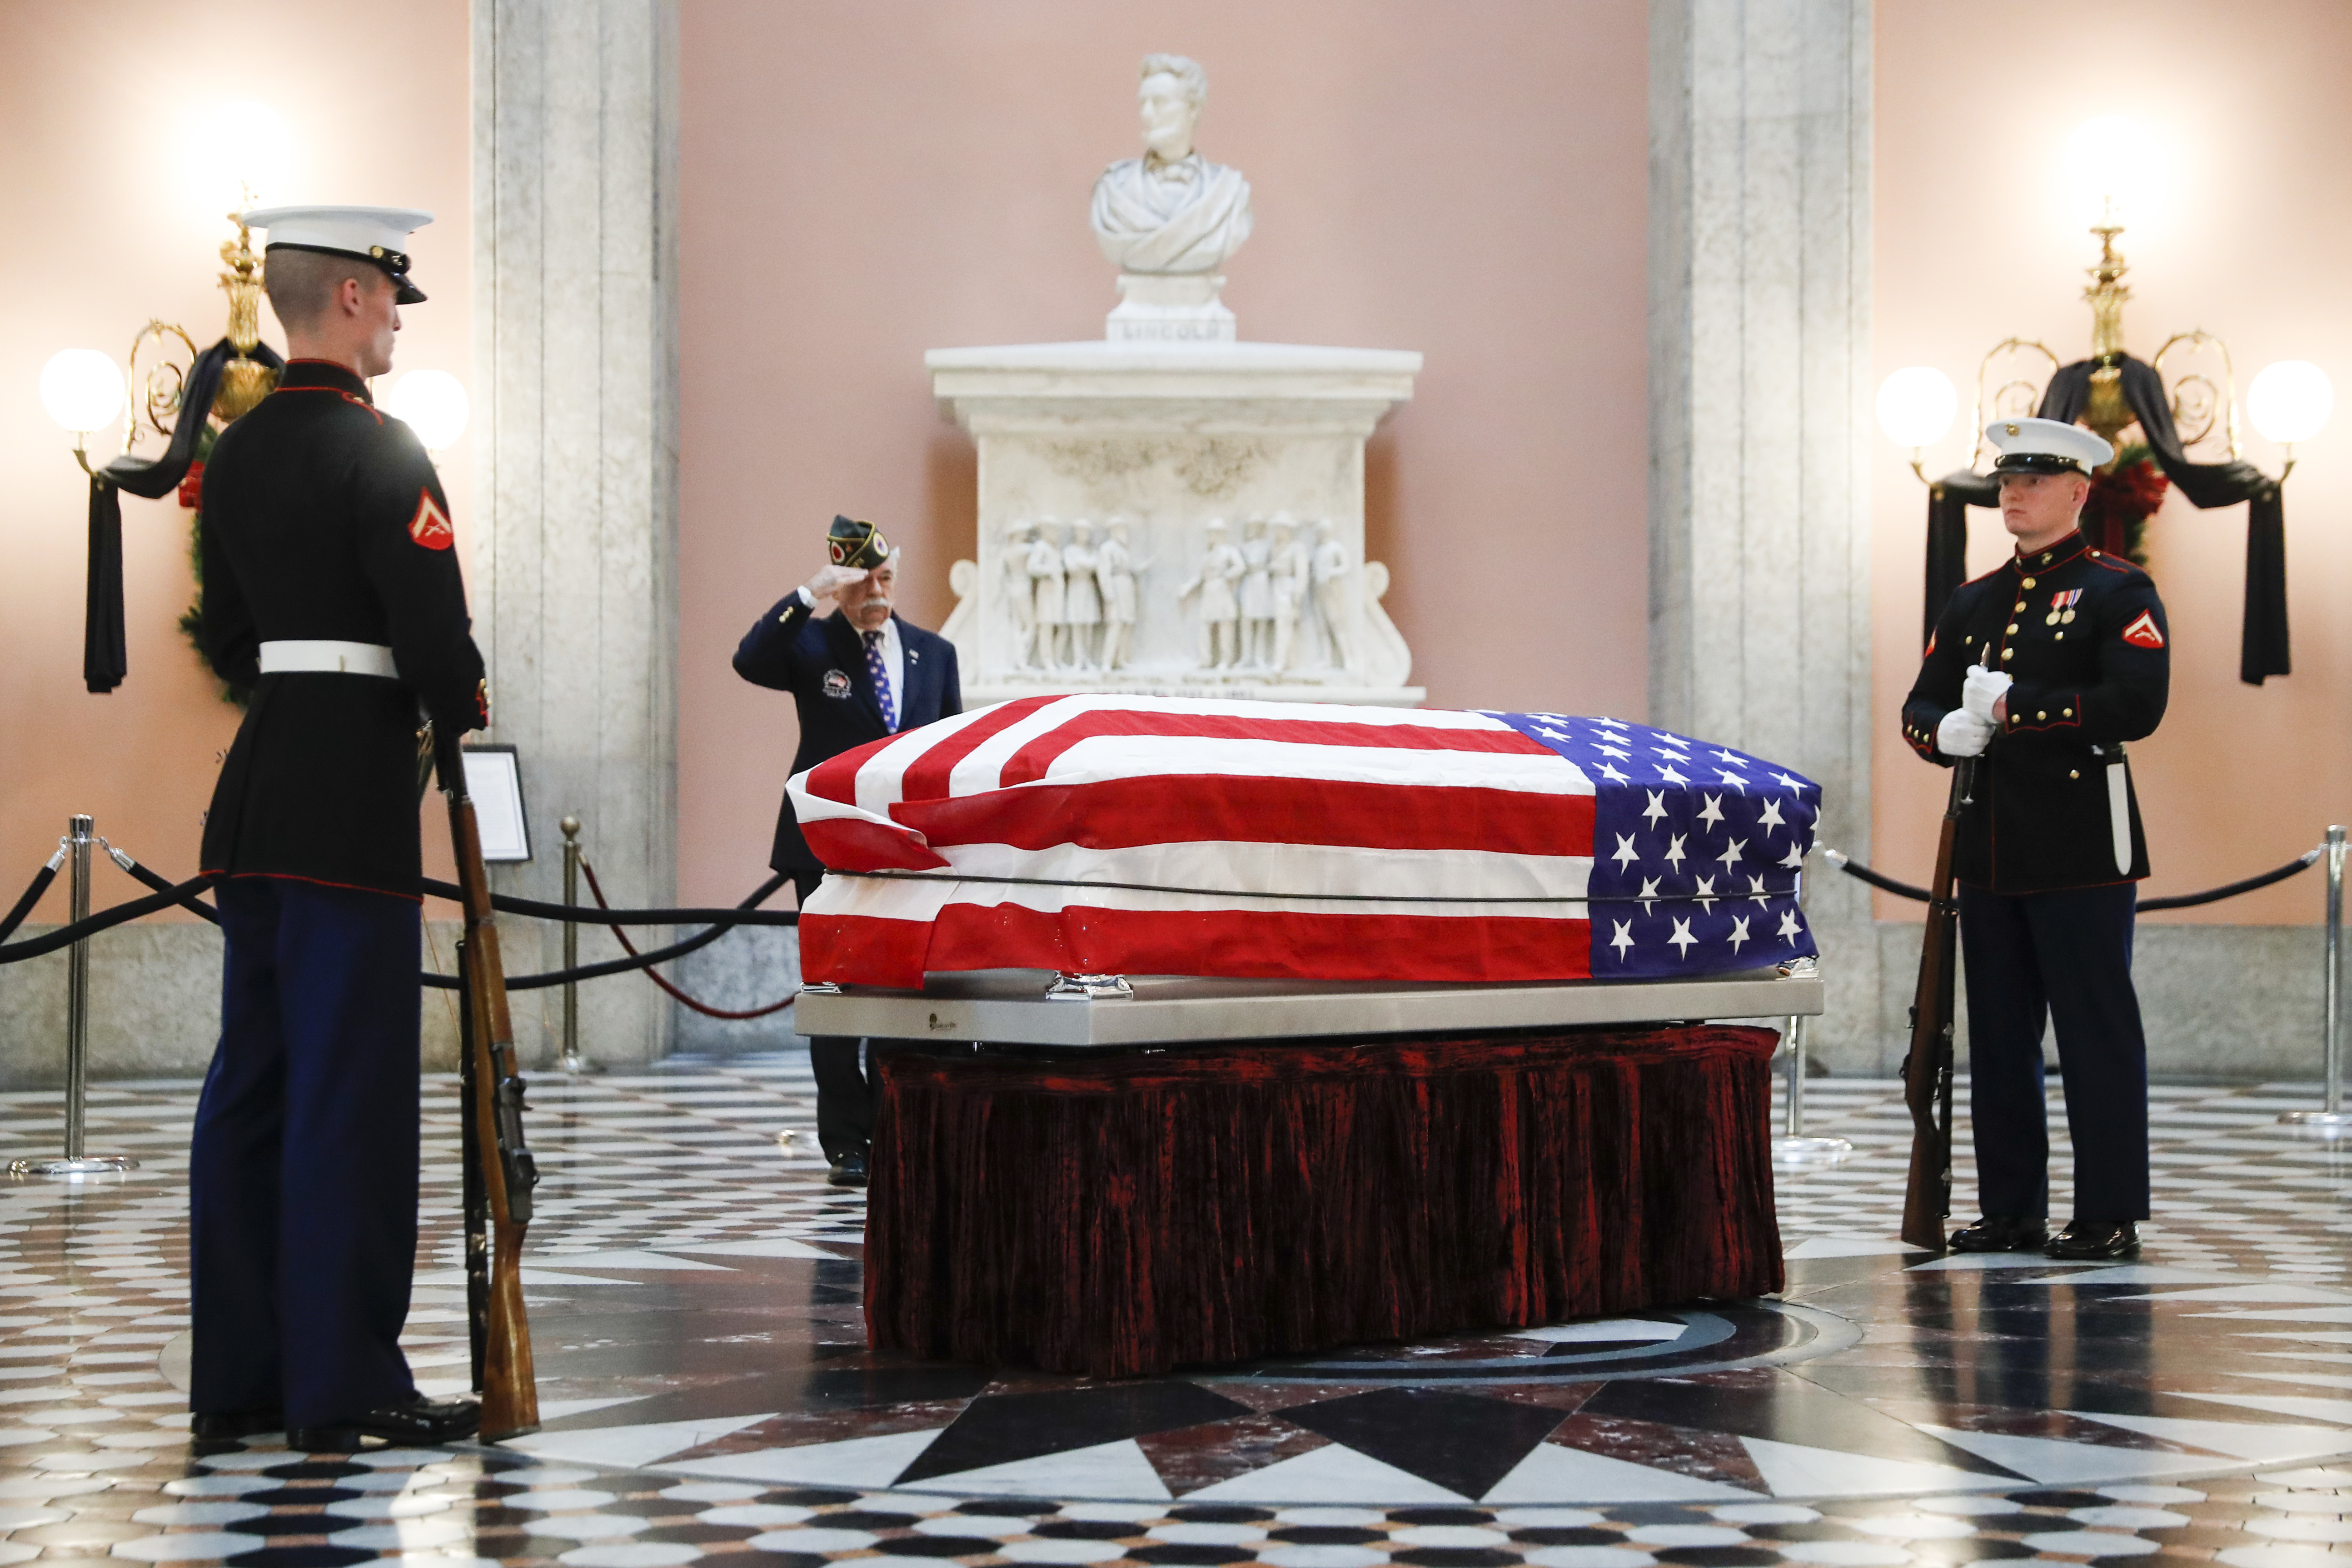 Marines stand guard at the casket of the John Glenn as he lies in repose, Friday, Dec. 16, 2016, in Columbus, Ohio. Glenn's home state and the nation began saying goodbye to the famed astronaut as he lies in state at Ohio's capitol building. Glenn, 95, the first American to orbit Earth, died last week. (AP Photo/John Minchillo)